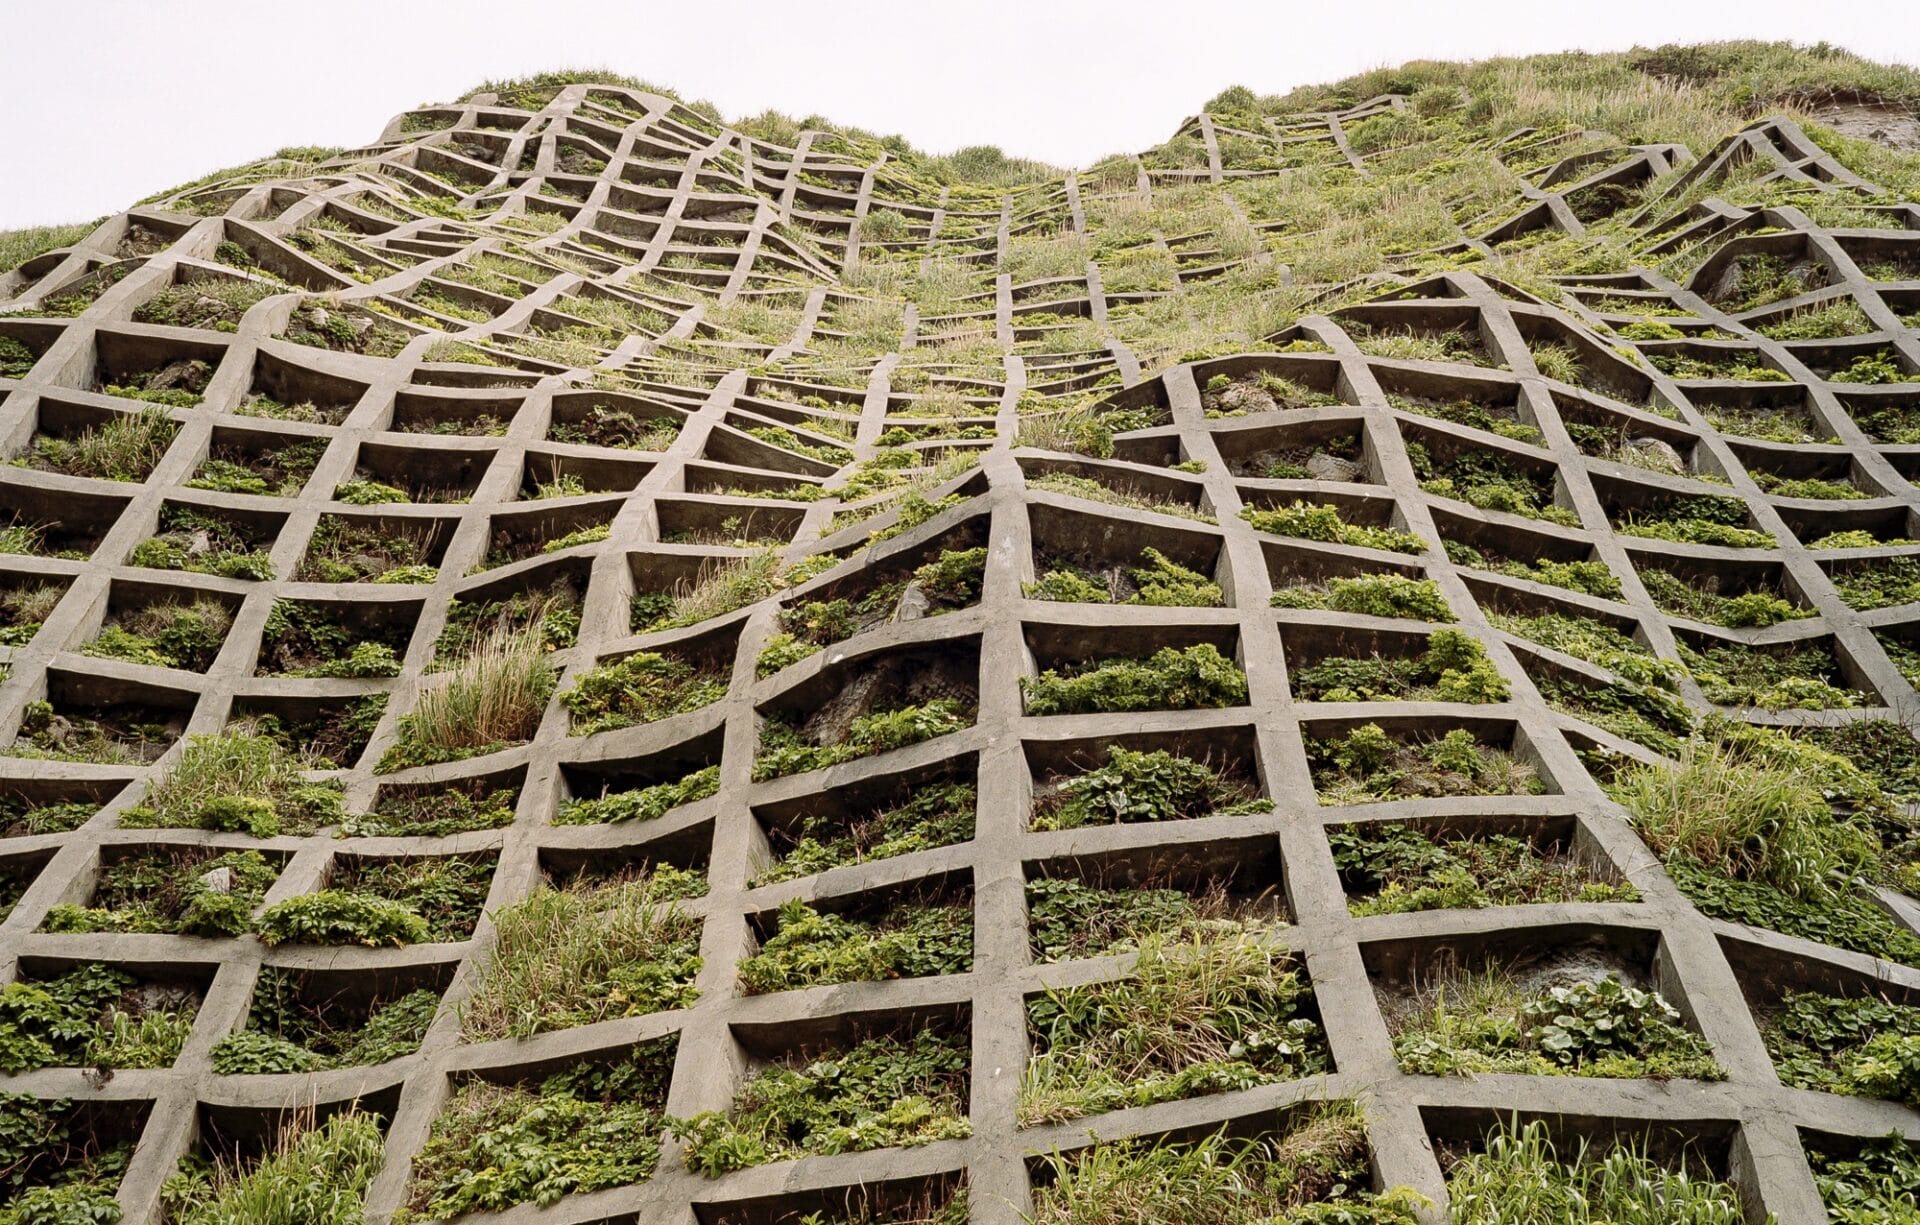 an undulating architectural gridded wall, viewed looking straight up, with pockets of greenery in each square